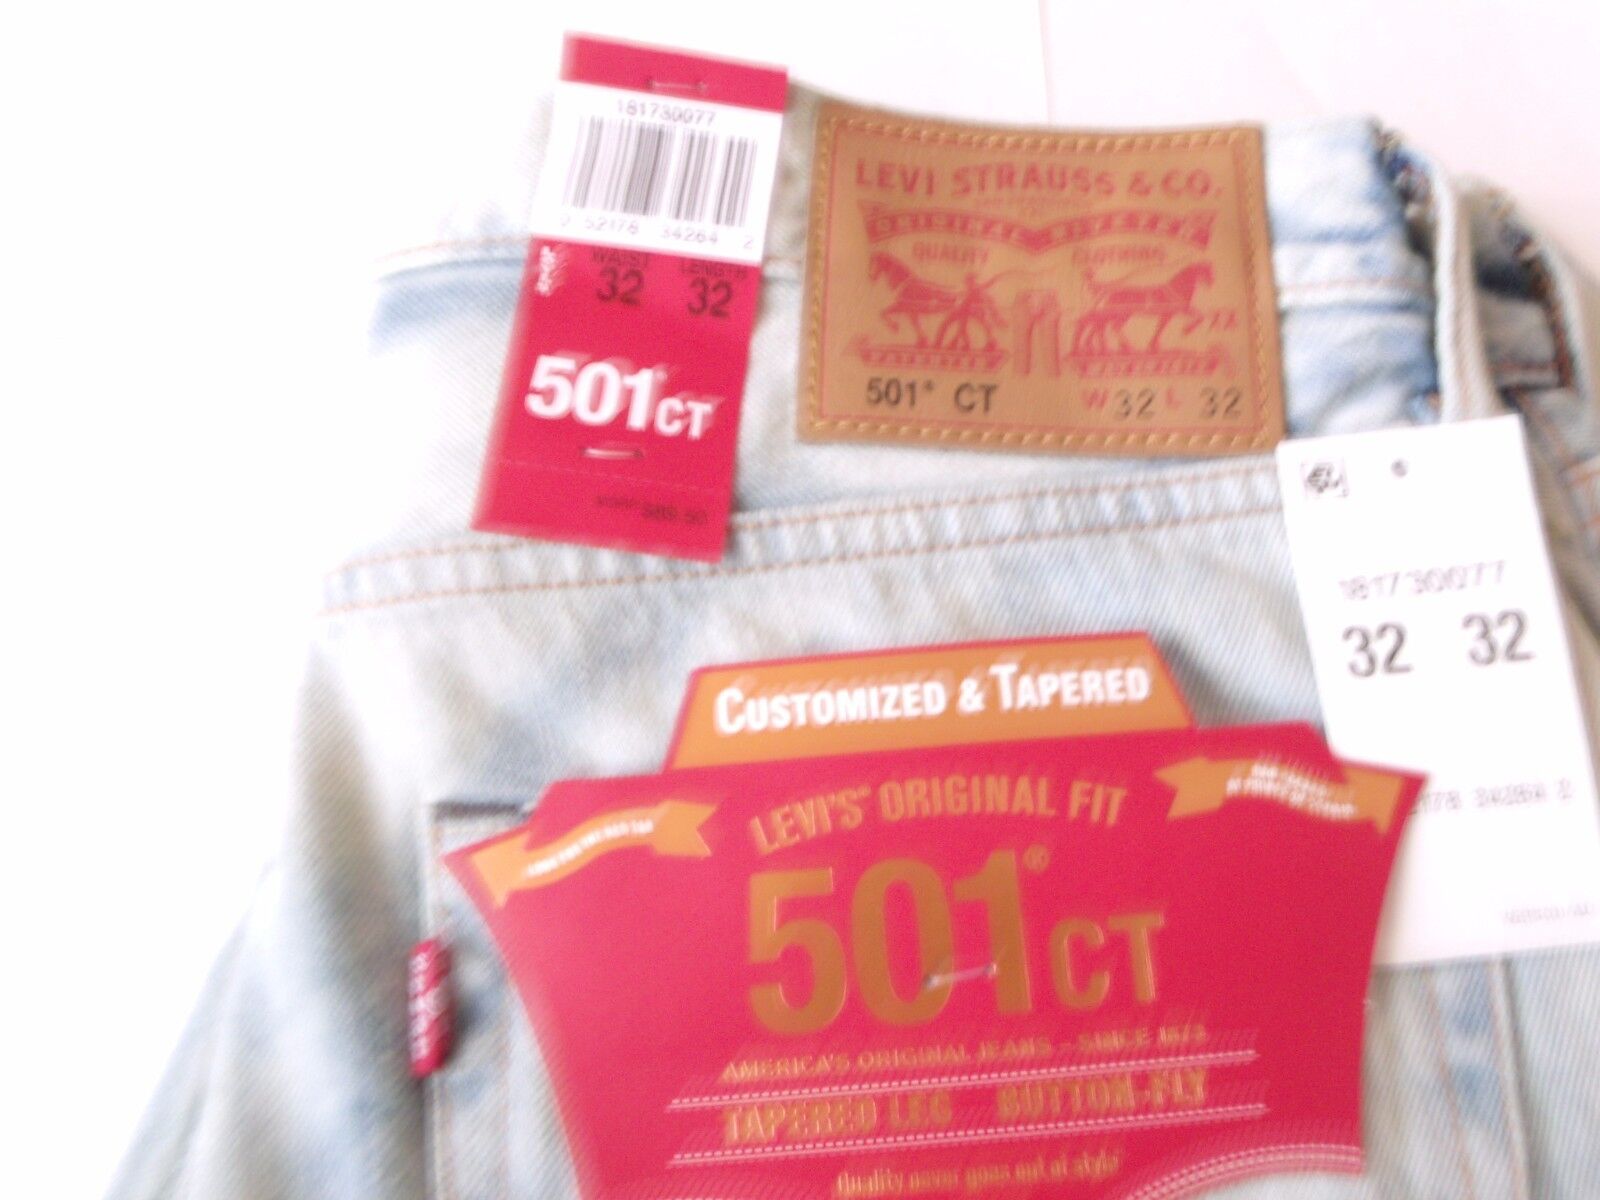 This Is a Pair of Levi's Jeans : The Official History of the 